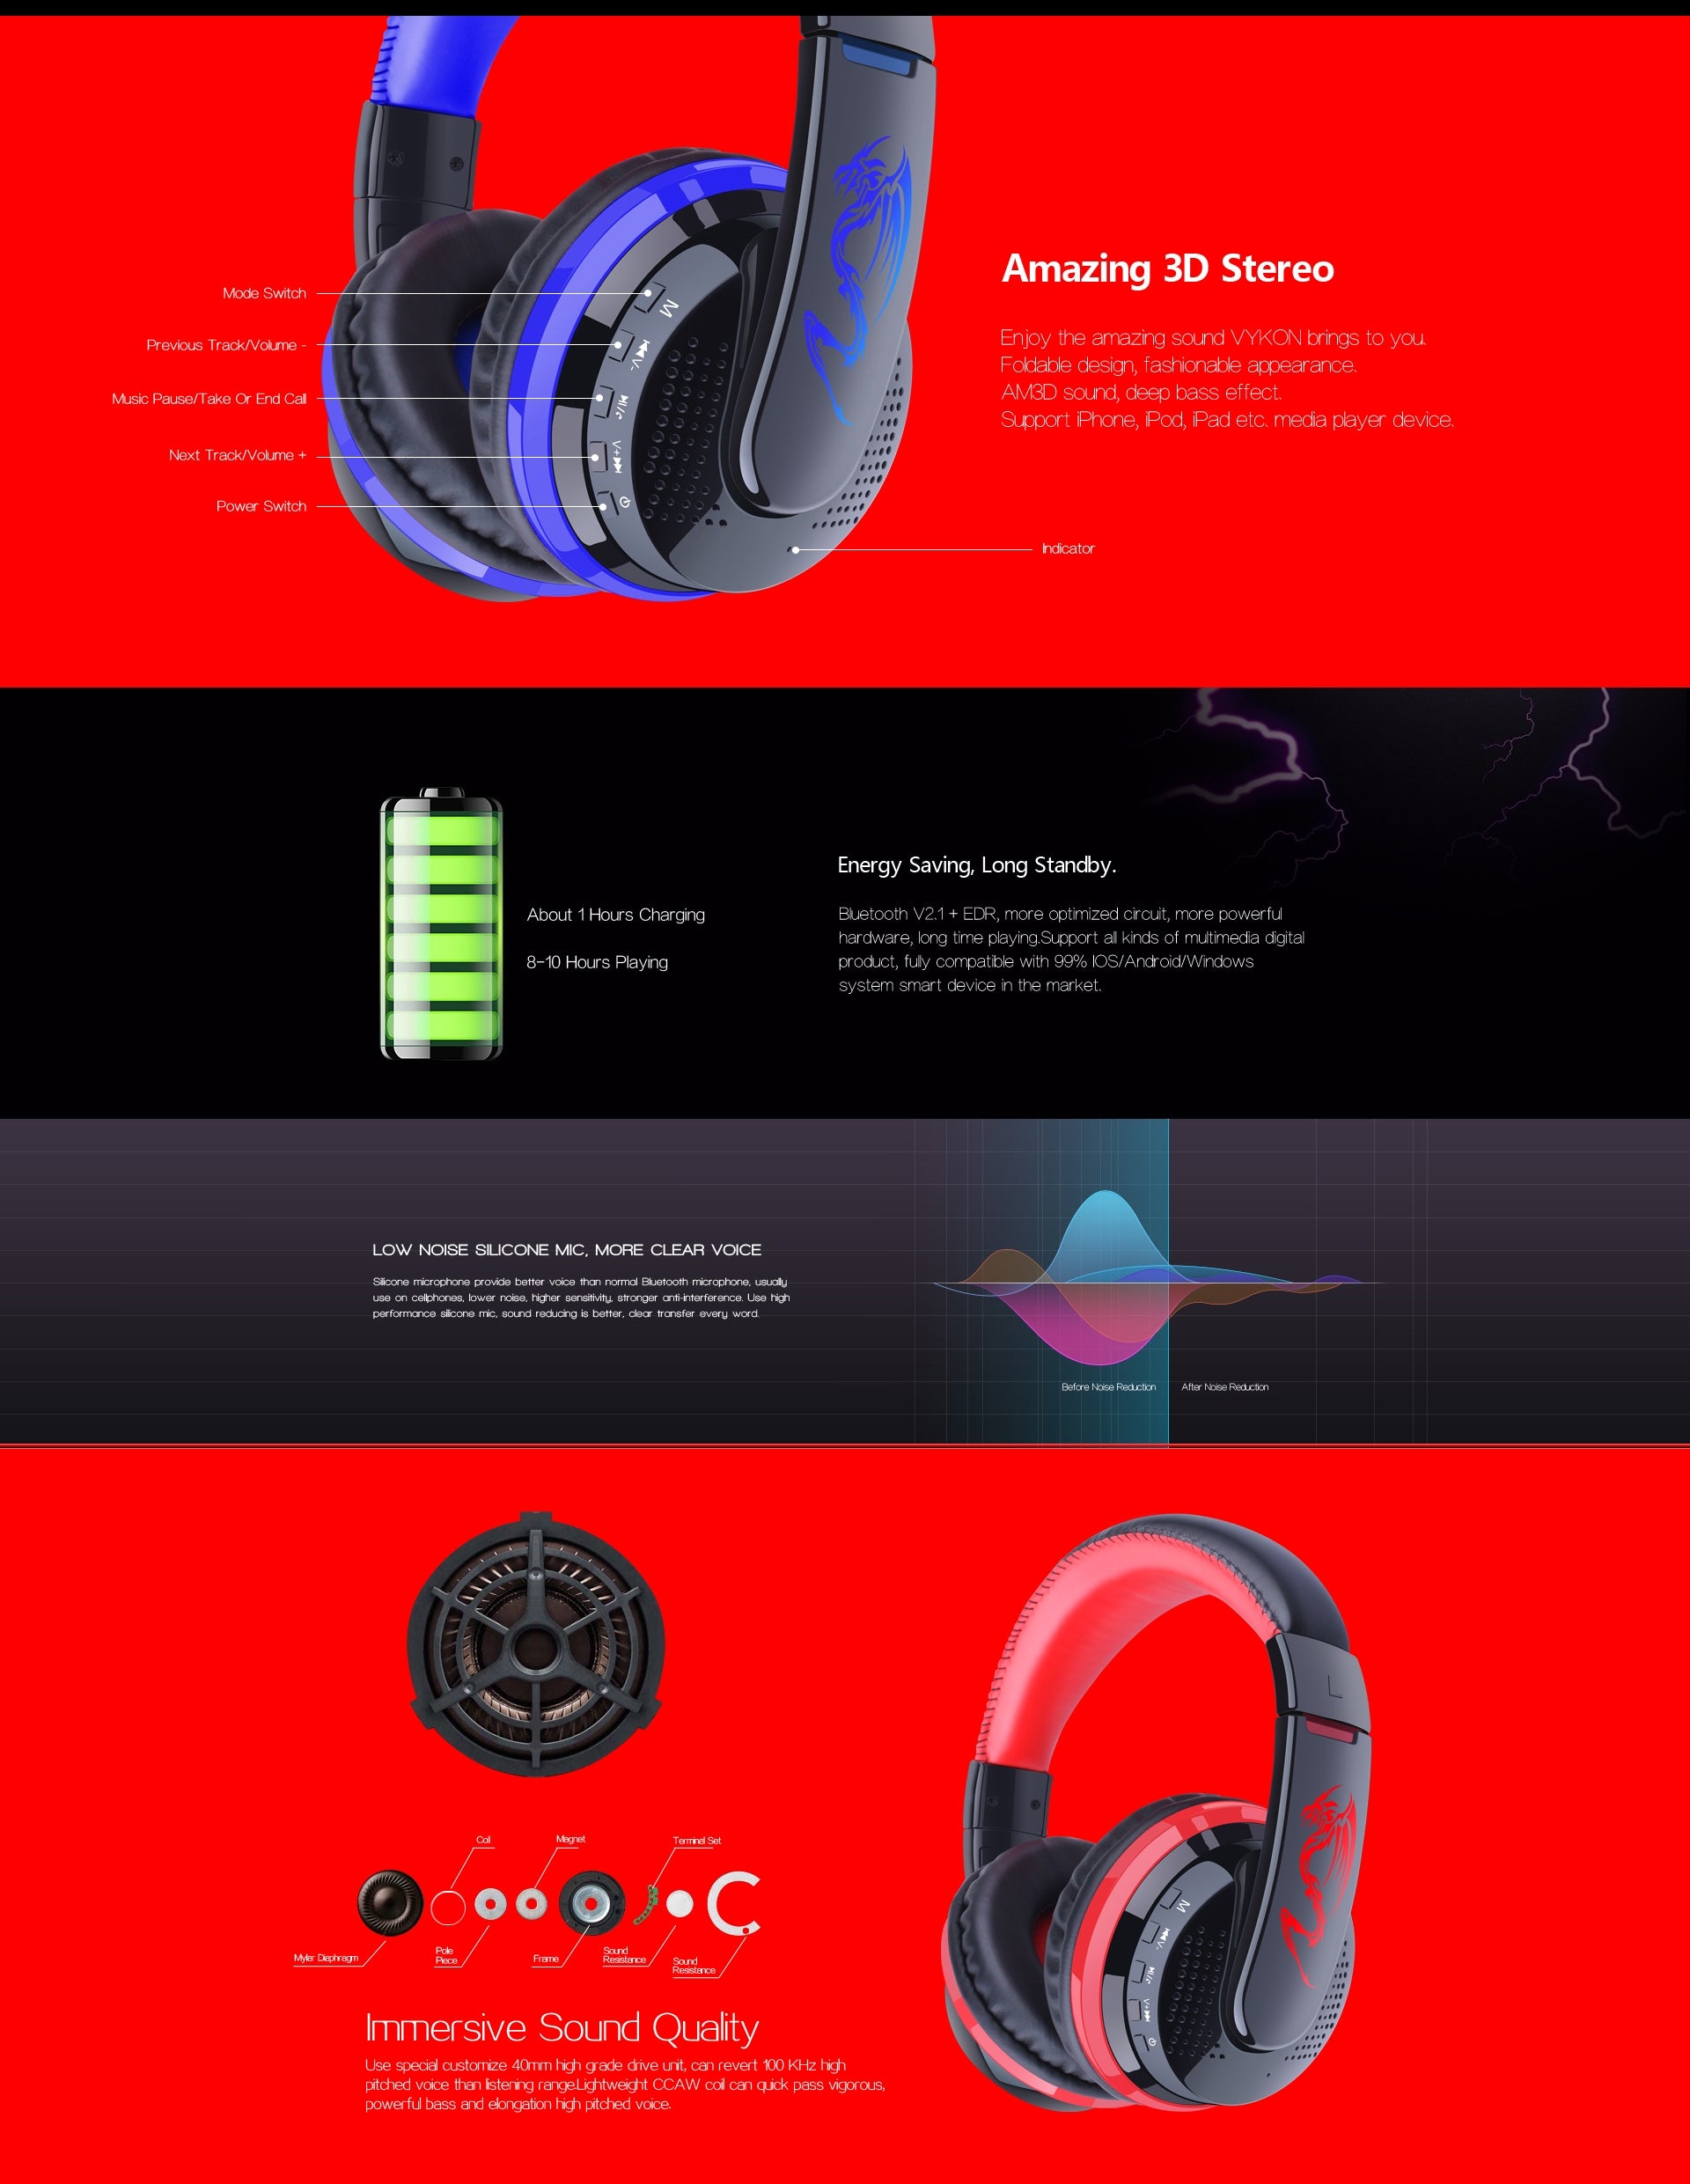 OVLENG MX666 Wireless Bluetooth Music Headphones with Mic Noise Canceling - Red